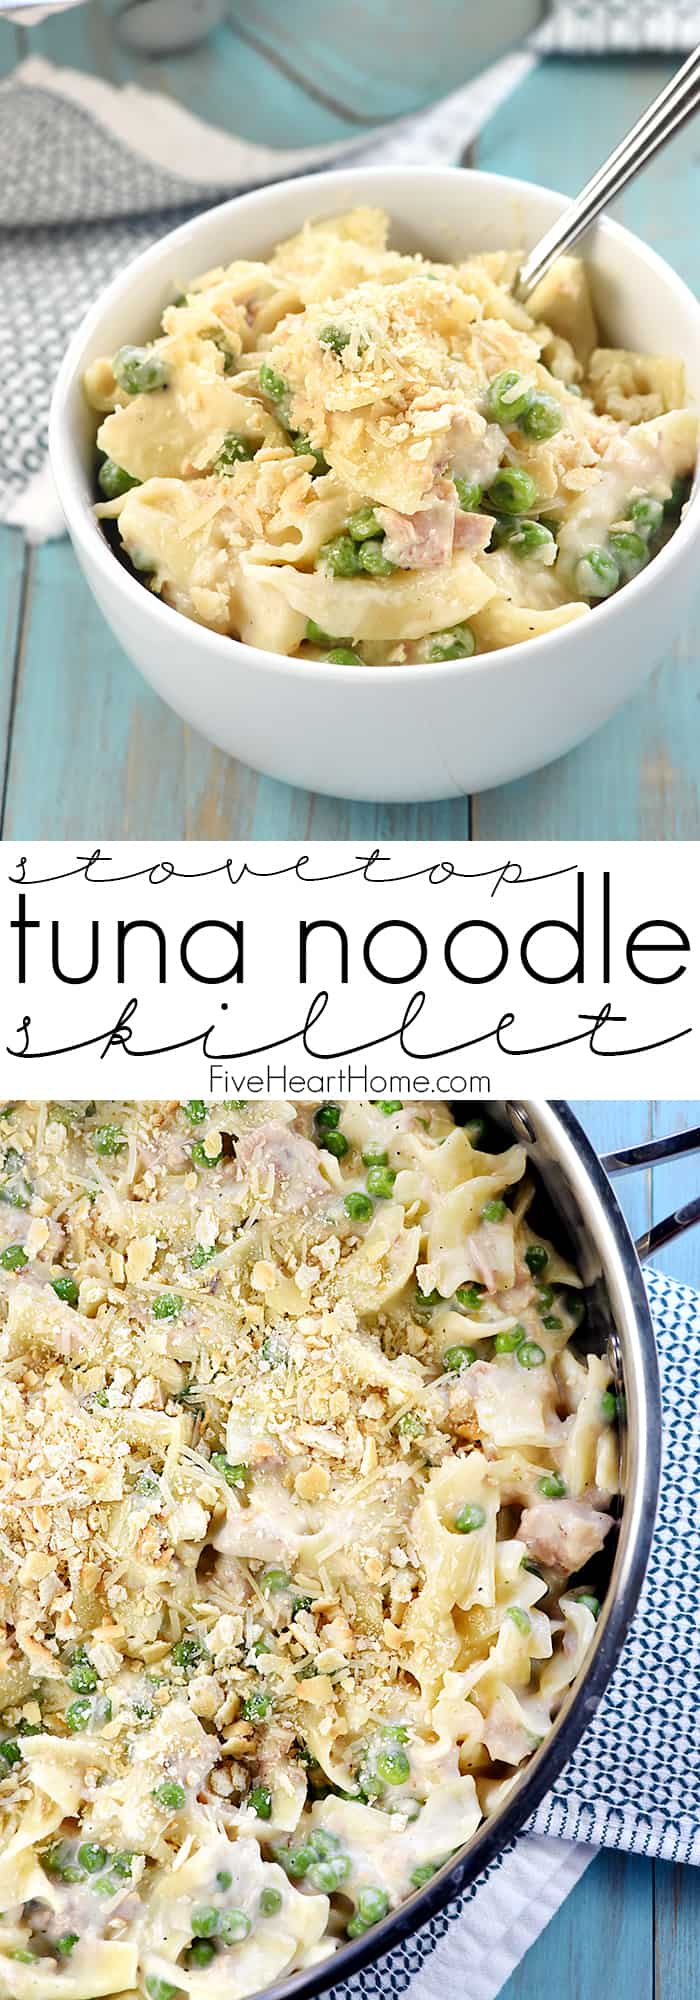 Easy Tuna Noodle Casserole is a quick, stovetop, from-scratch dinner recipe loaded with tuna, egg noodles, peas, and a creamy, cheesy, homemade white sauce (without soup)! | FiveHeartHome.com via @fivehearthome